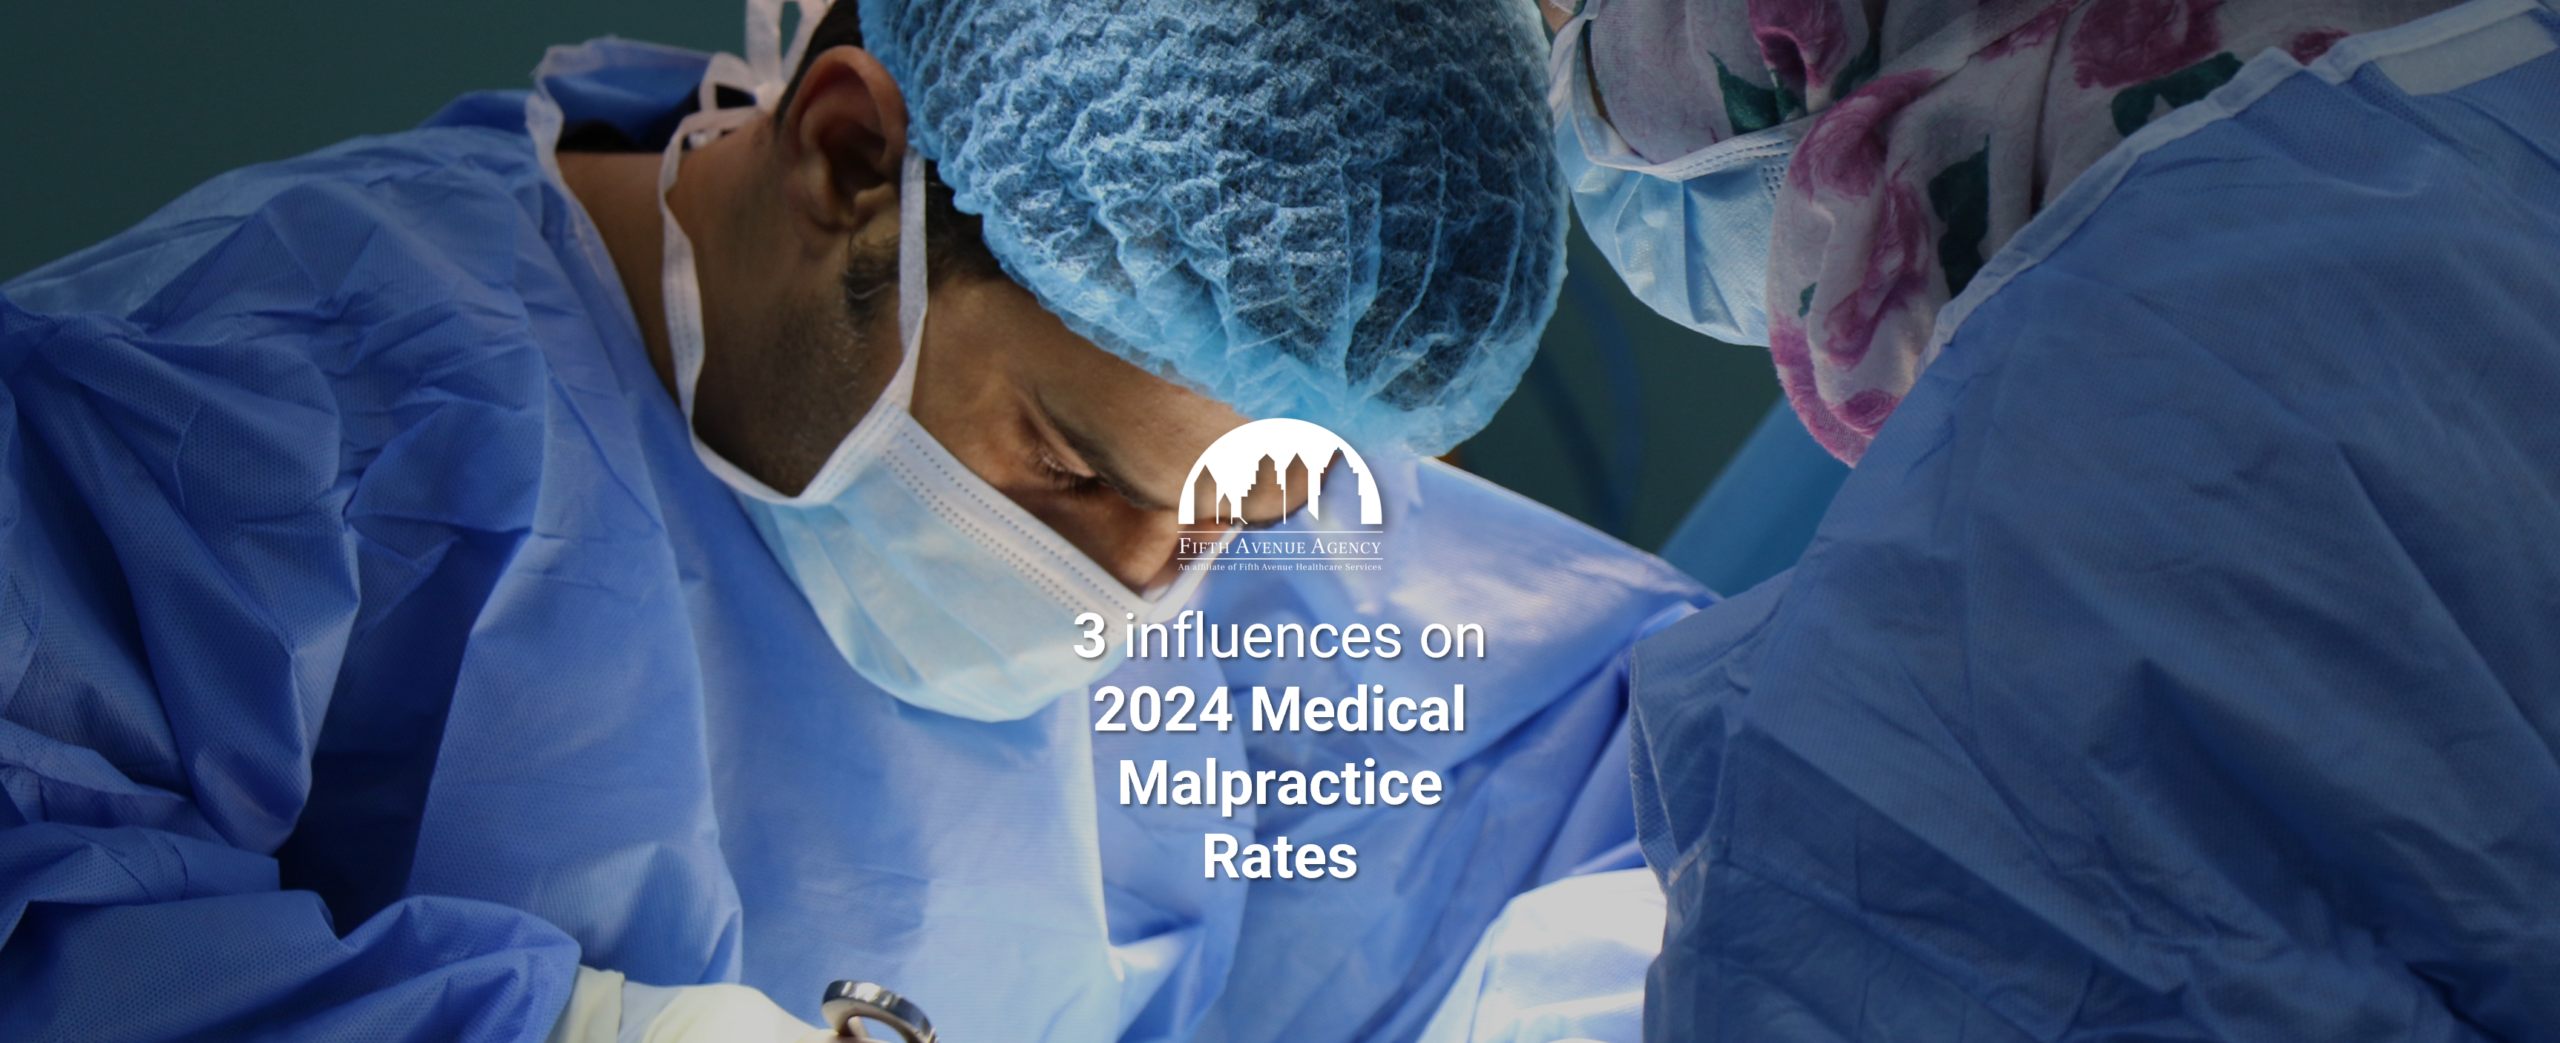 3 Impacts On 2024 Medical Malpractice Rates